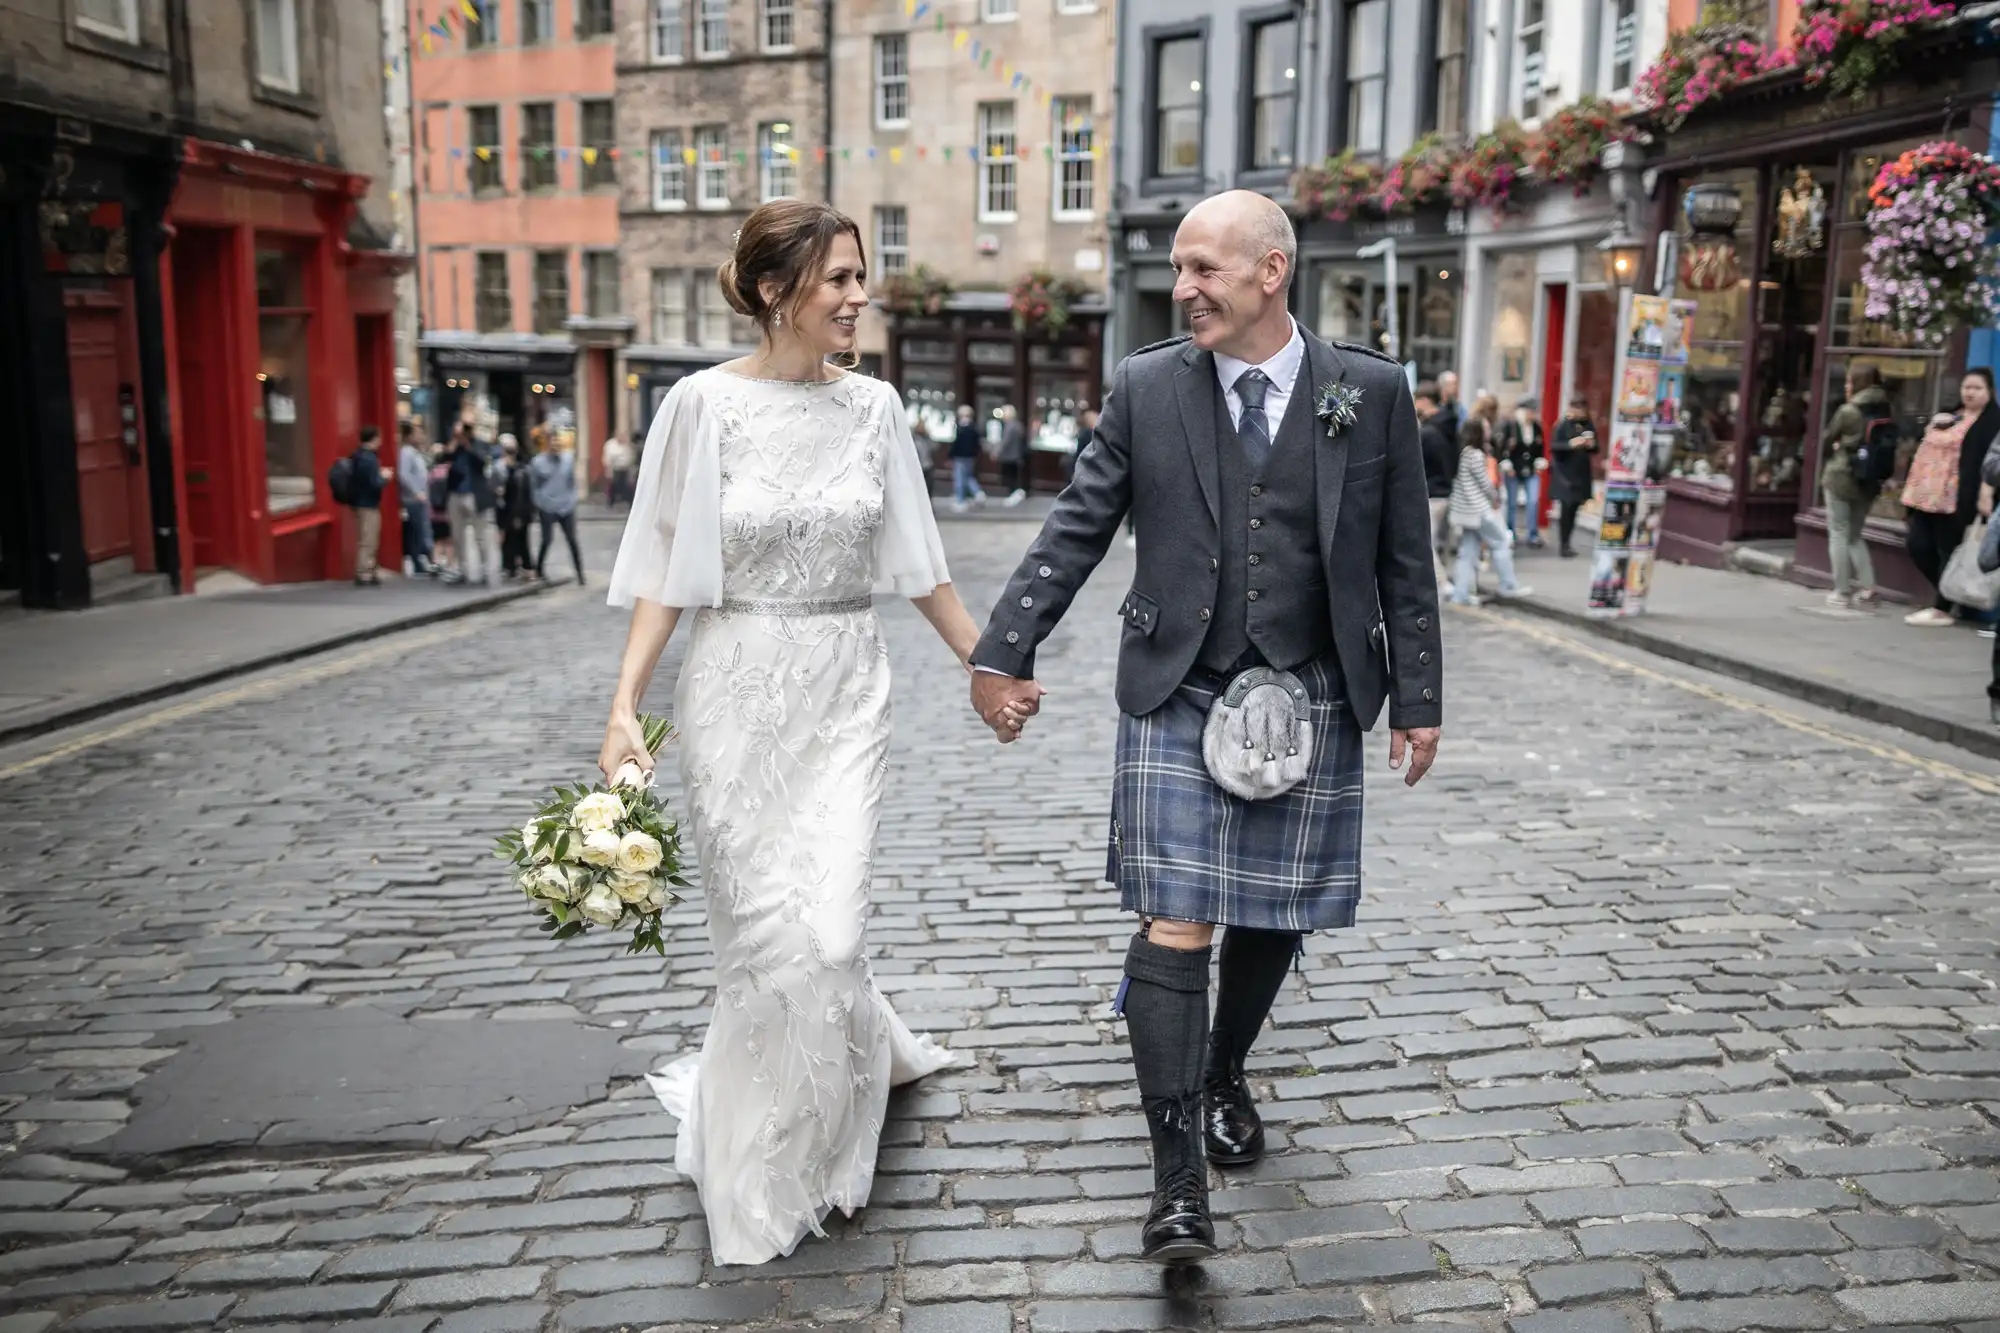 A couple, with the man in a kilt and the woman in a white wedding dress, walk hand-in-hand on a cobblestone street in a city setting. The man holds a bouquet of flowers.